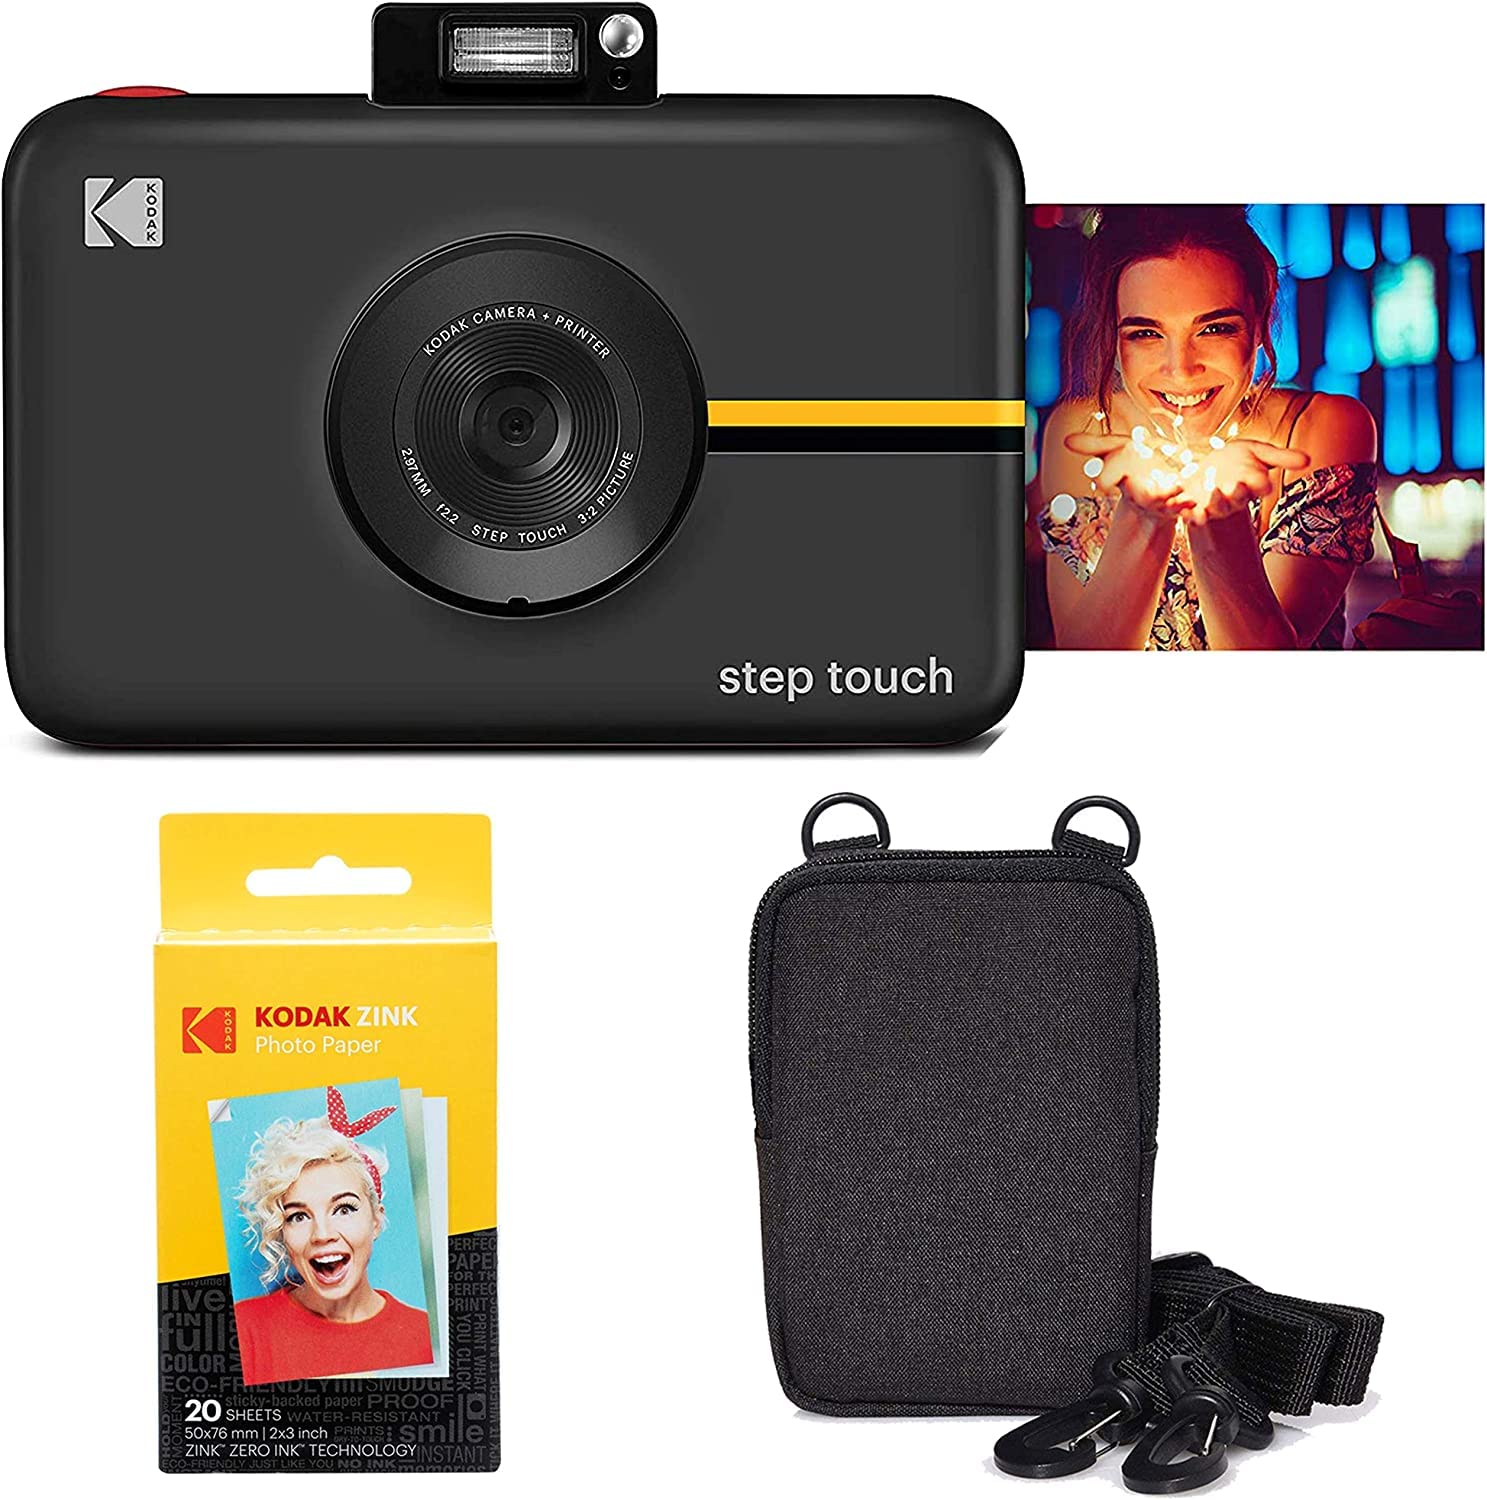 Kodak Step Touch 13MP Digital Camera & Instant Printer with 3.5 LCD Touchscreen (Black) Go Bundle